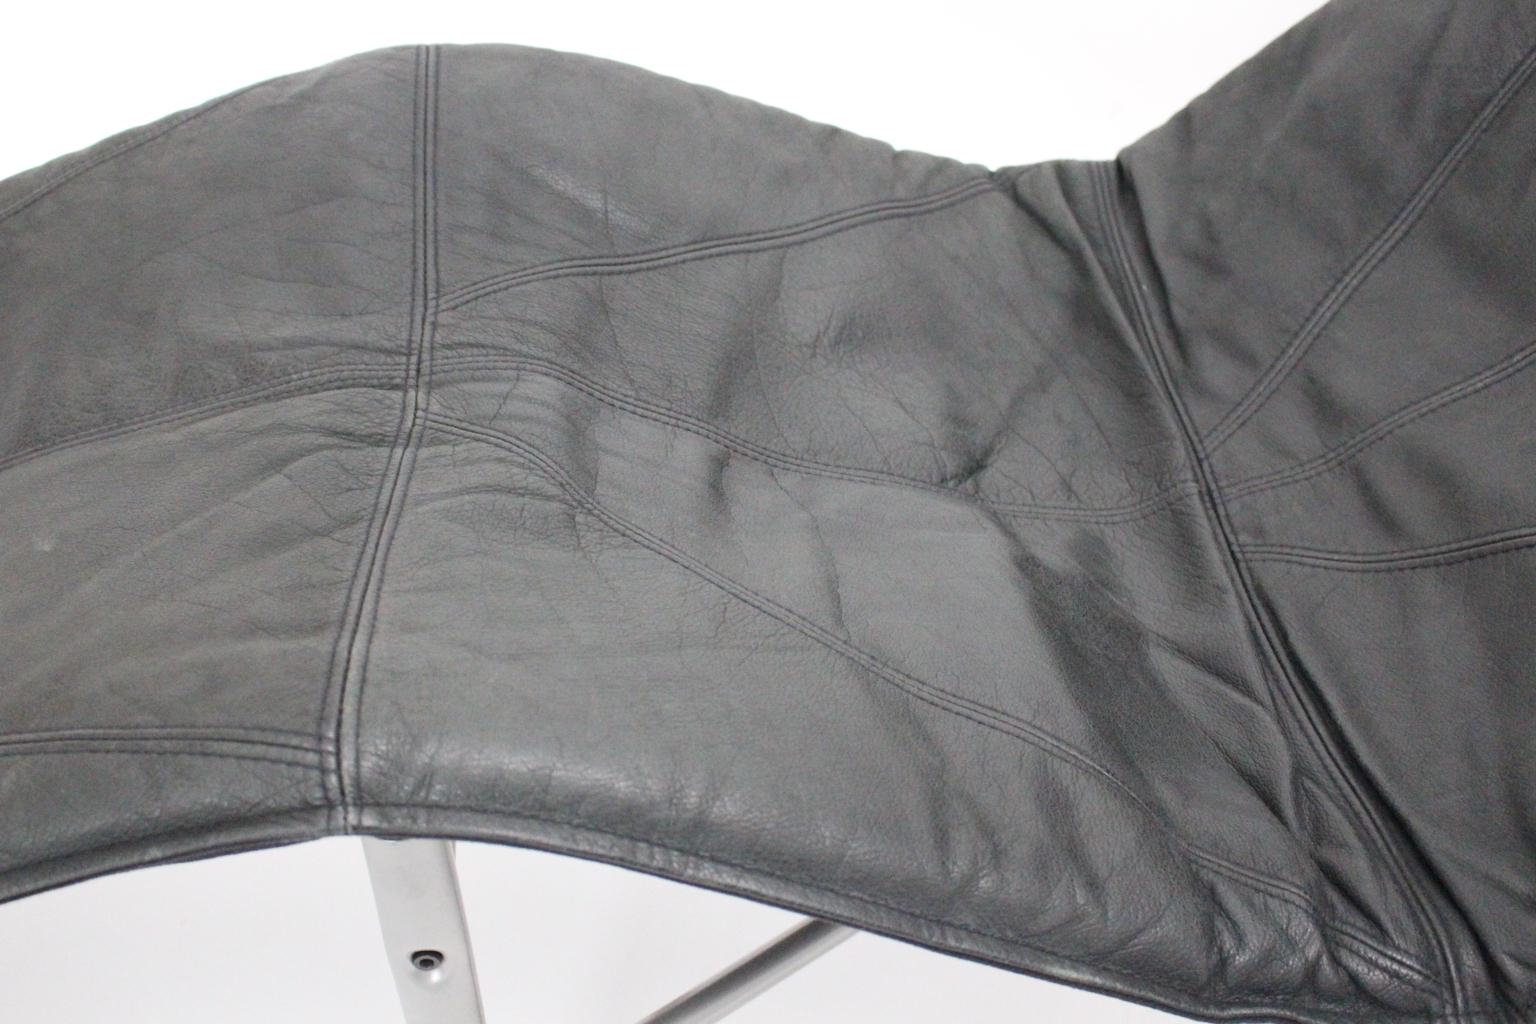 Mid-Century Modern Vintage Black Leather Chaise Longue by Tord Bjorklund, 1970 For Sale 5